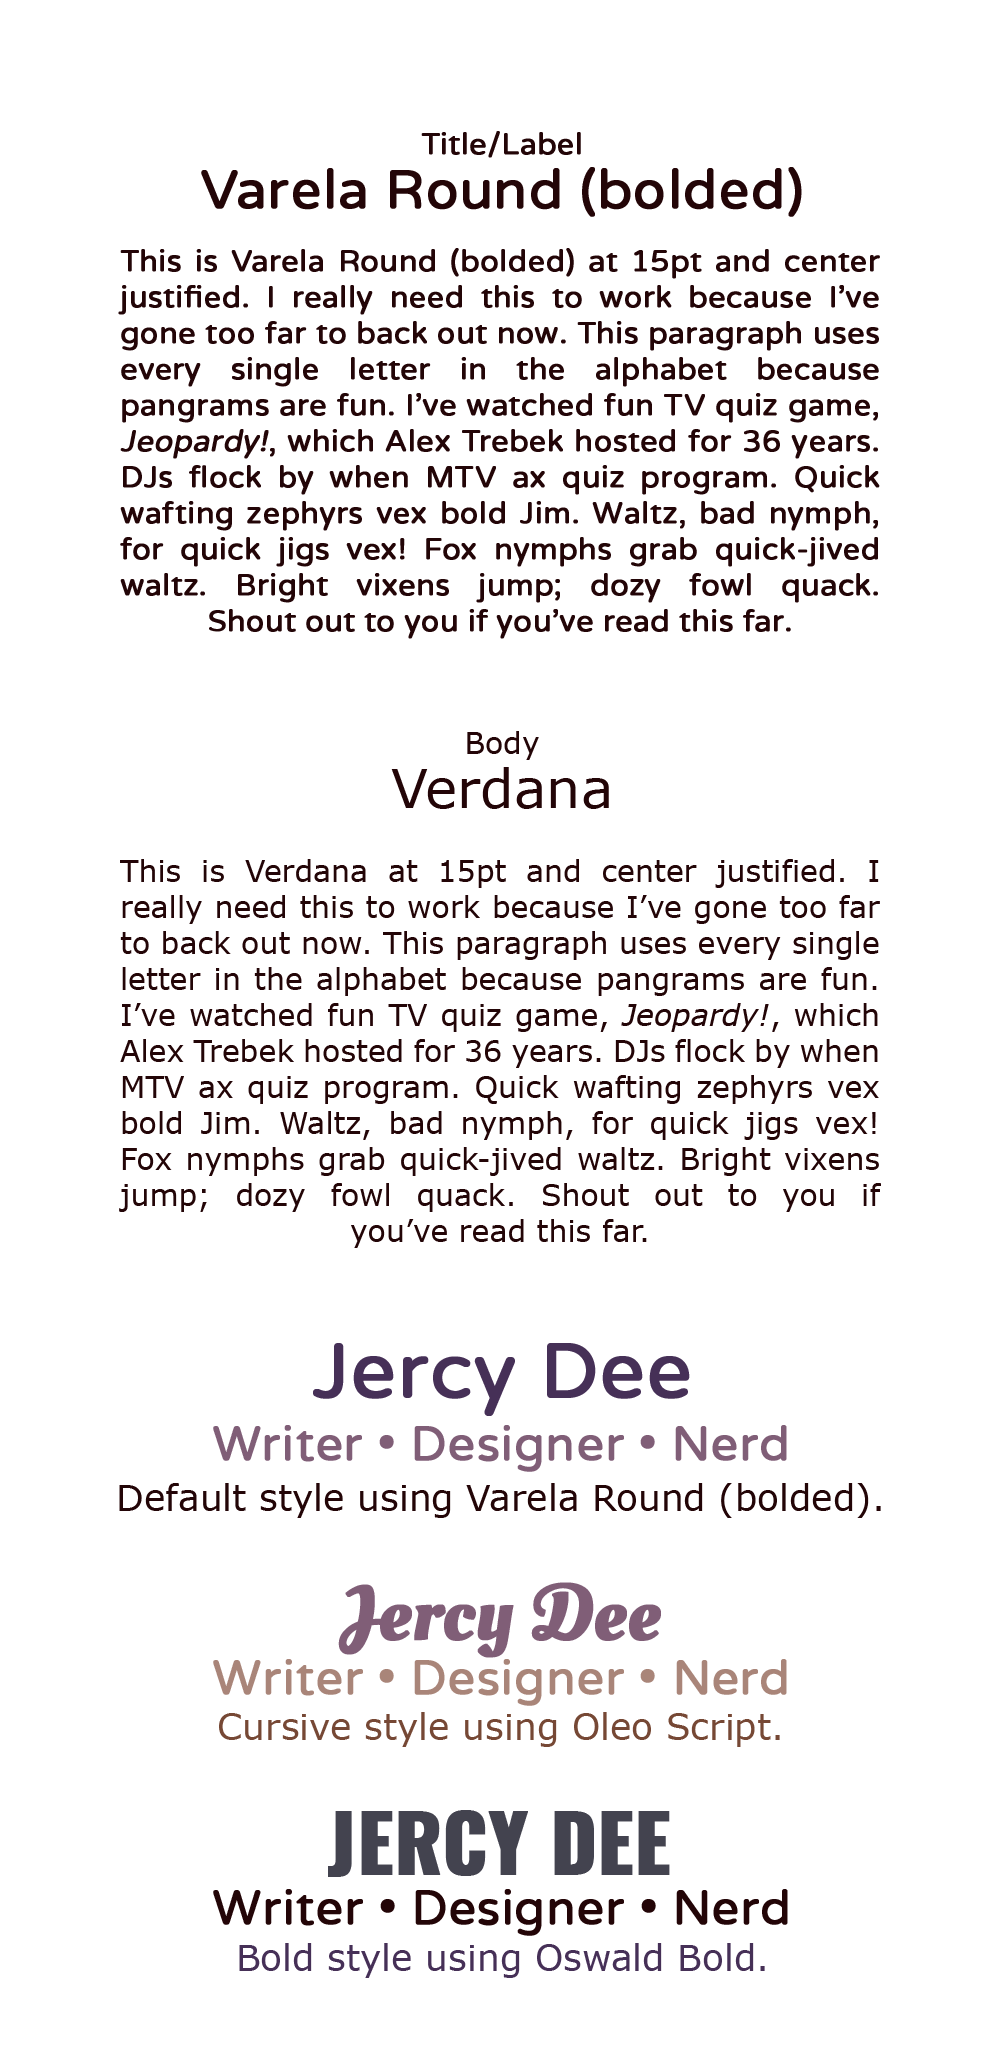 A graphic listing the typefaces: In the top half, blocks of text displaying Varela Round and Verdana in different fonts. In the bottom half, three examples using Varela and Verdana in different styles: default, cursive, and bold.